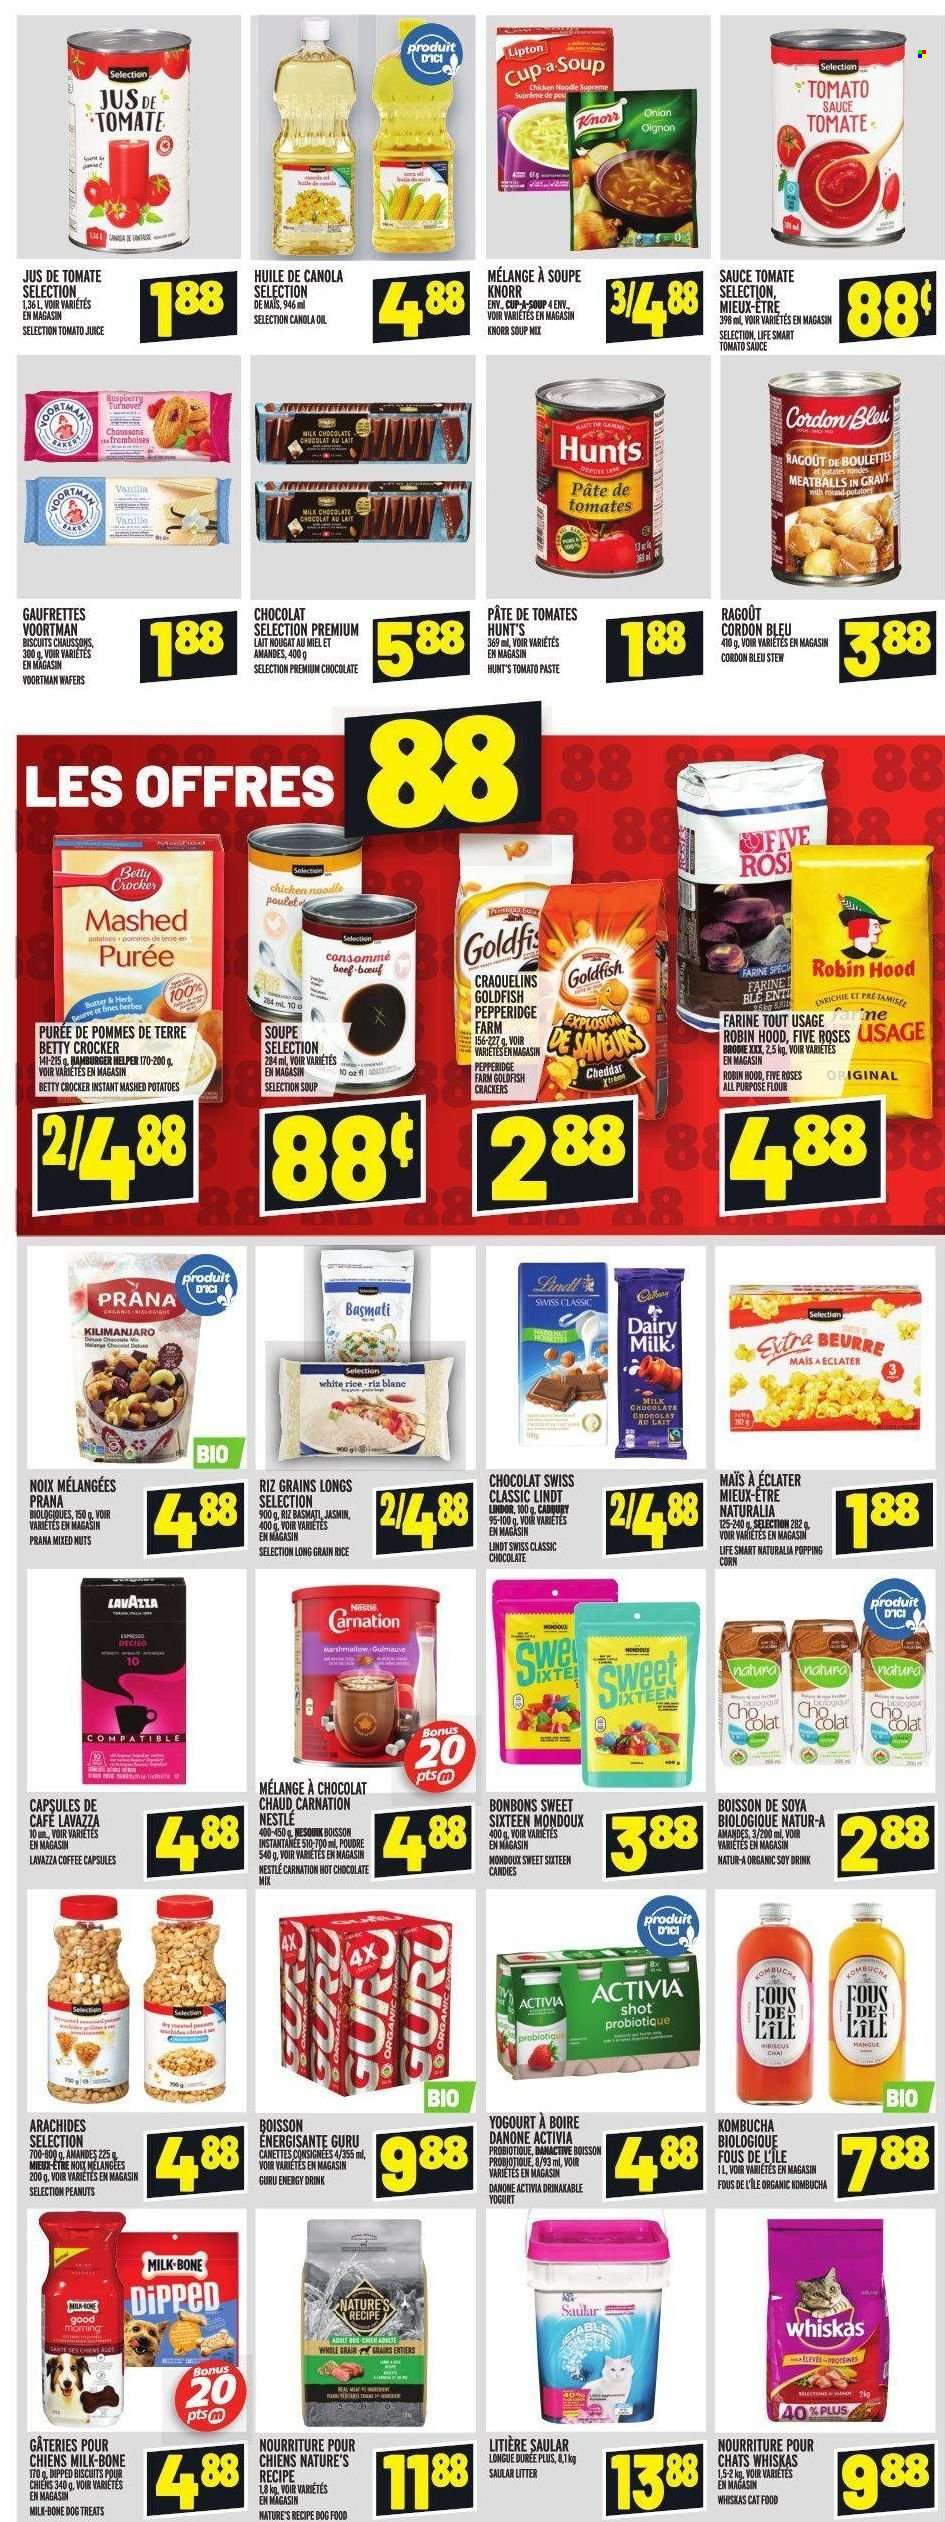 thumbnail - Metro Flyer - January 06, 2022 - January 12, 2022 - Sales products - corn, mashed potatoes, meatballs, soup, noodles, yoghurt, Activia, butter, marshmallows, milk chocolate, wafers, crackers, biscuit, Cadbury, Dairy Milk, Goldfish, all purpose flour, flour, oats, tomato paste, tomato sauce, basmati rice, rice, white rice, long grain rice, canola oil, oil, peanuts, mixed nuts, energy drink, kombucha, hot chocolate, coffee, coffee capsules, Lavazza, cup, animal food, cat food, dog food, Knorr, Danone, Nestlé, Lipton, Whiskas, Lindt, Lindor, cordon bleu, nougat. Page 10.